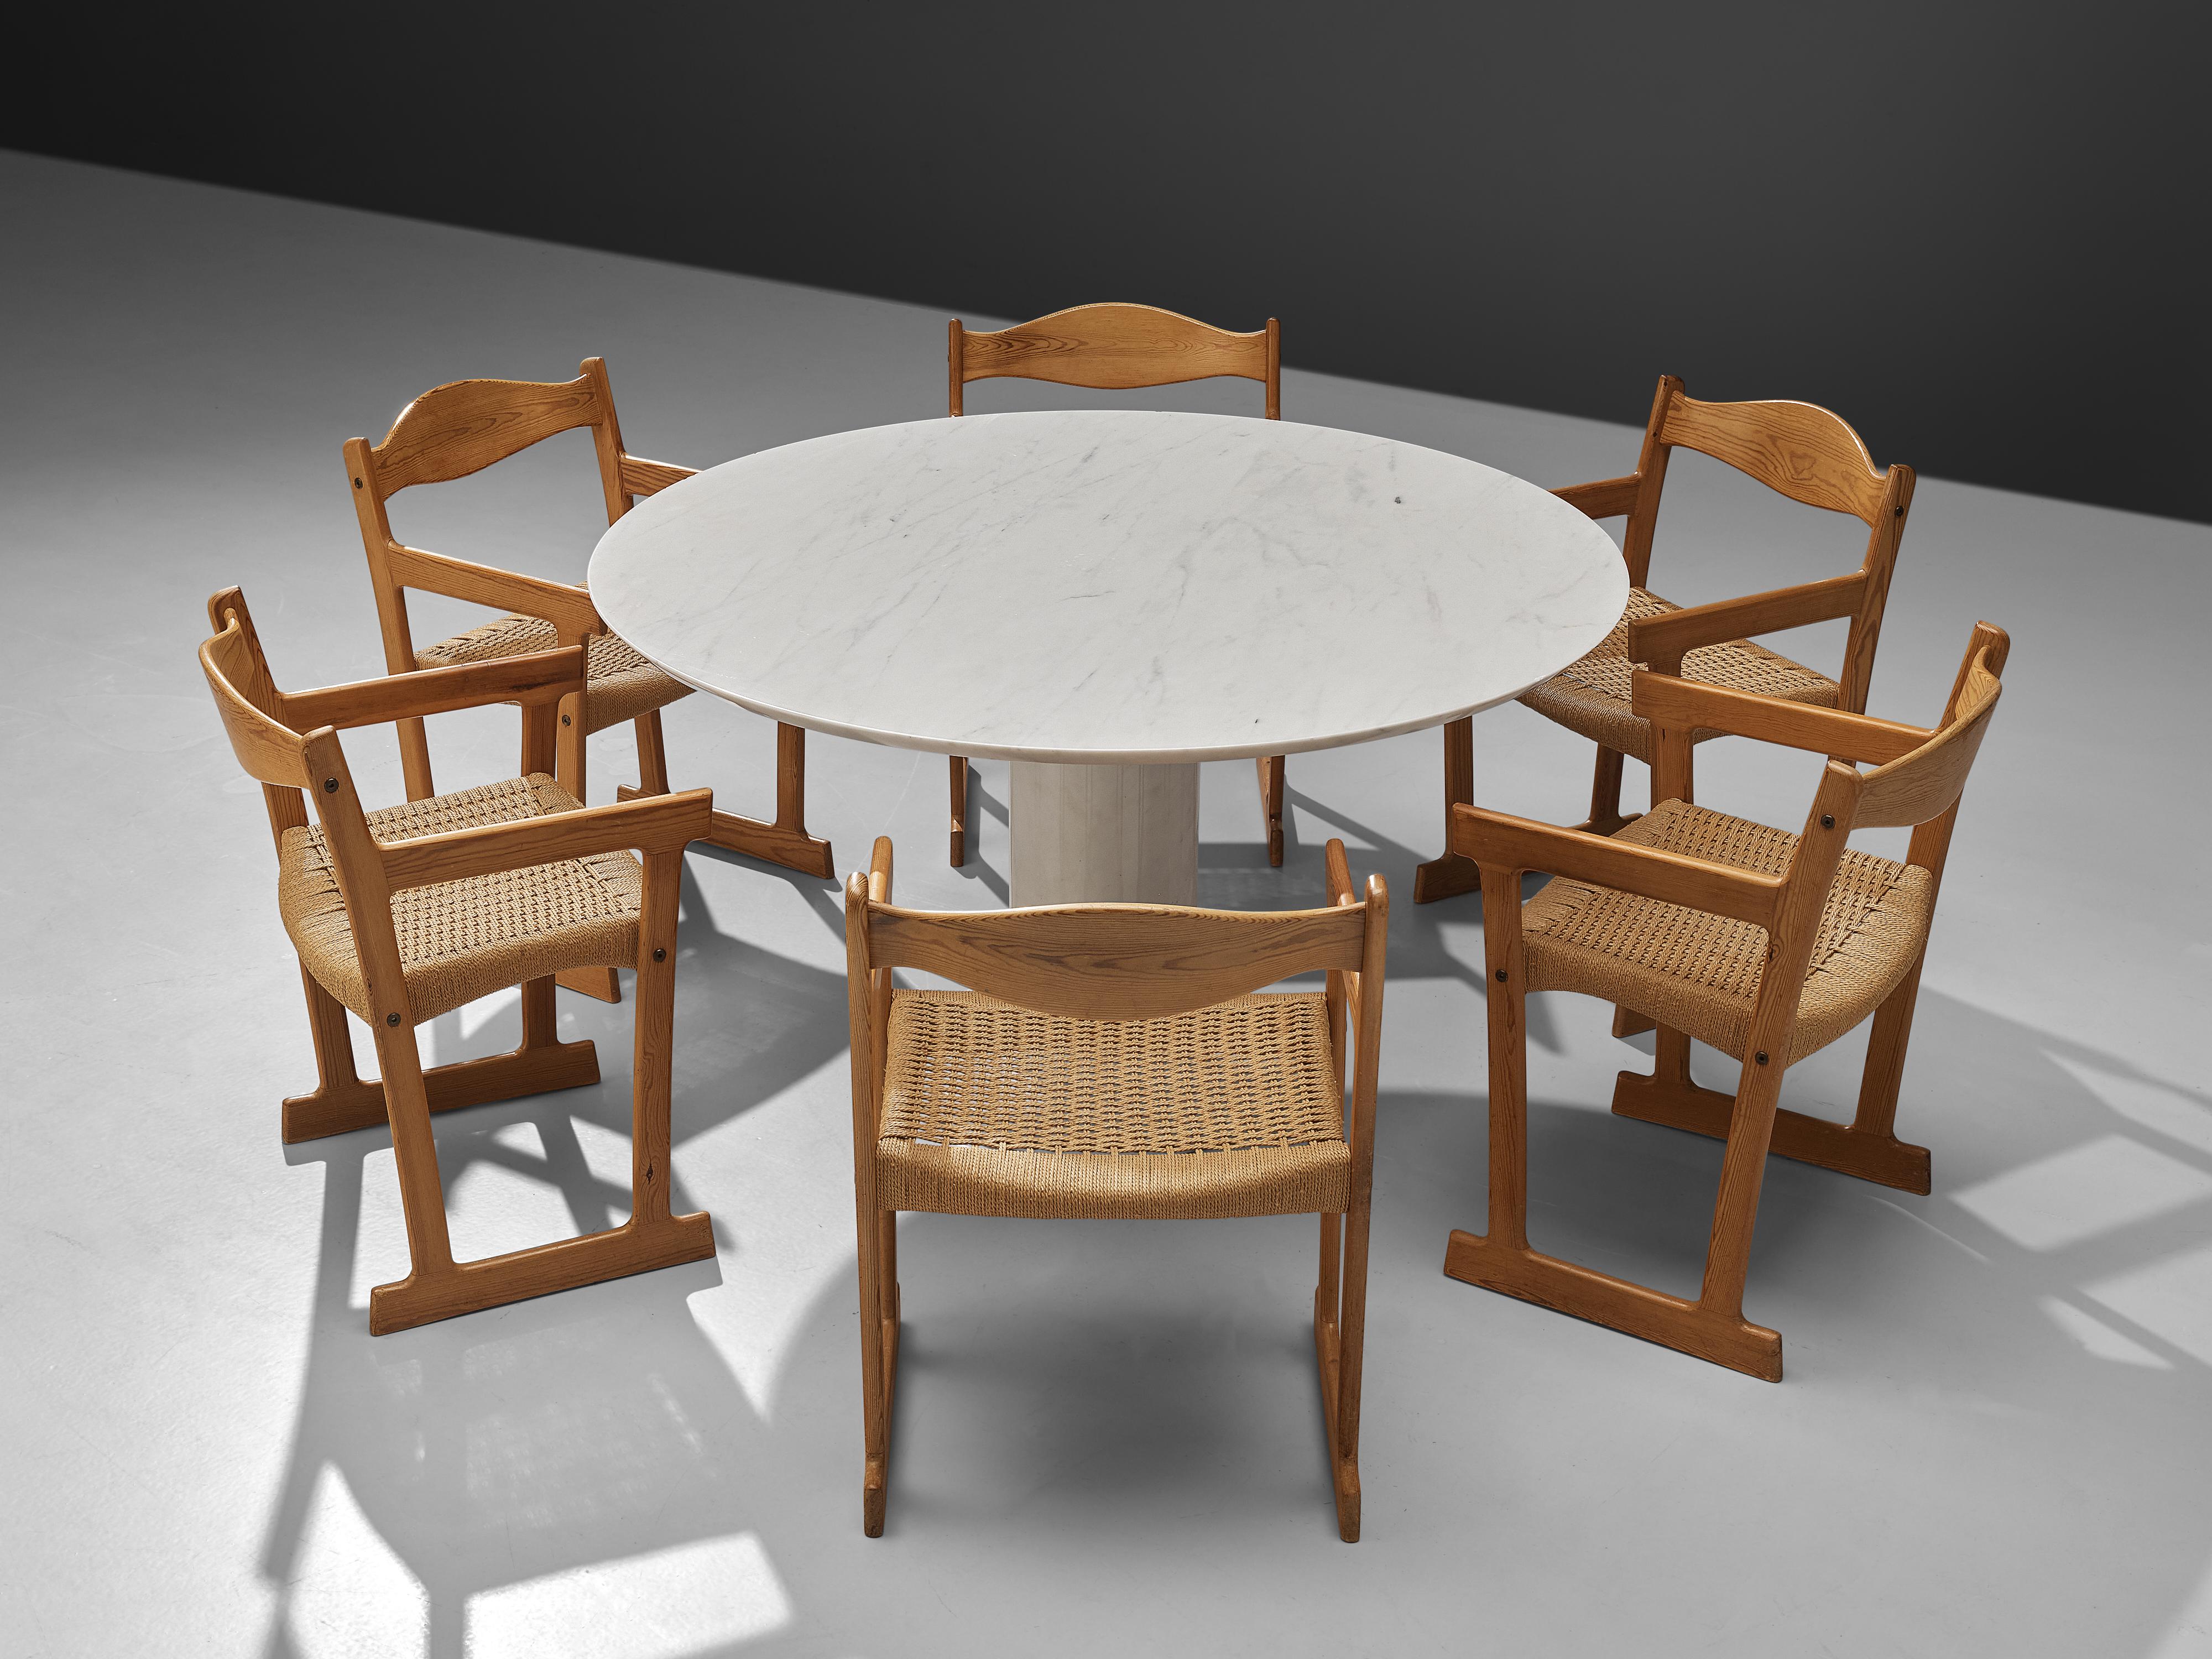 Round dining table, white marble, Italy, 1960s

This wonderful combination of wooden dining chairs around a round marble table forms a striking combination of colors and textures. The pedestal table stands on a cylindric base and a round feet.